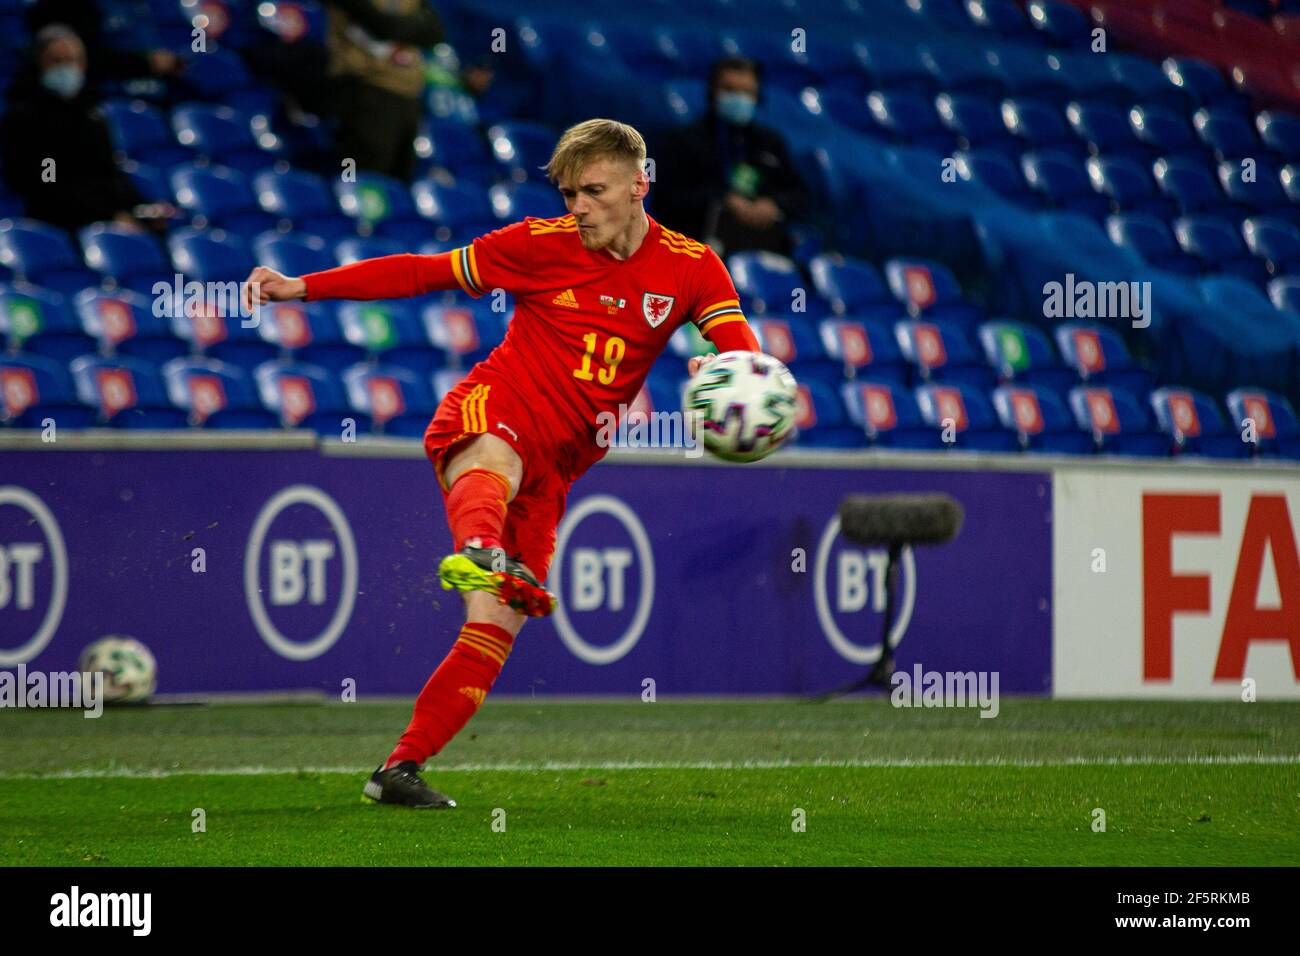 Cardiff, UK. 27th Mar, 2021. Matthew Smith of Wales crosses the ball Football international friendly match, Wales v Mexico, at the Cardiff city stadium in Cardiff, South Wales on Saturday 27th March 2021. Editorial use only. pic by Lewis Mitchell/Andrew Orchard sports photography/Alamy Live News Credit: Andrew Orchard sports photography/Alamy Live News Stock Photo